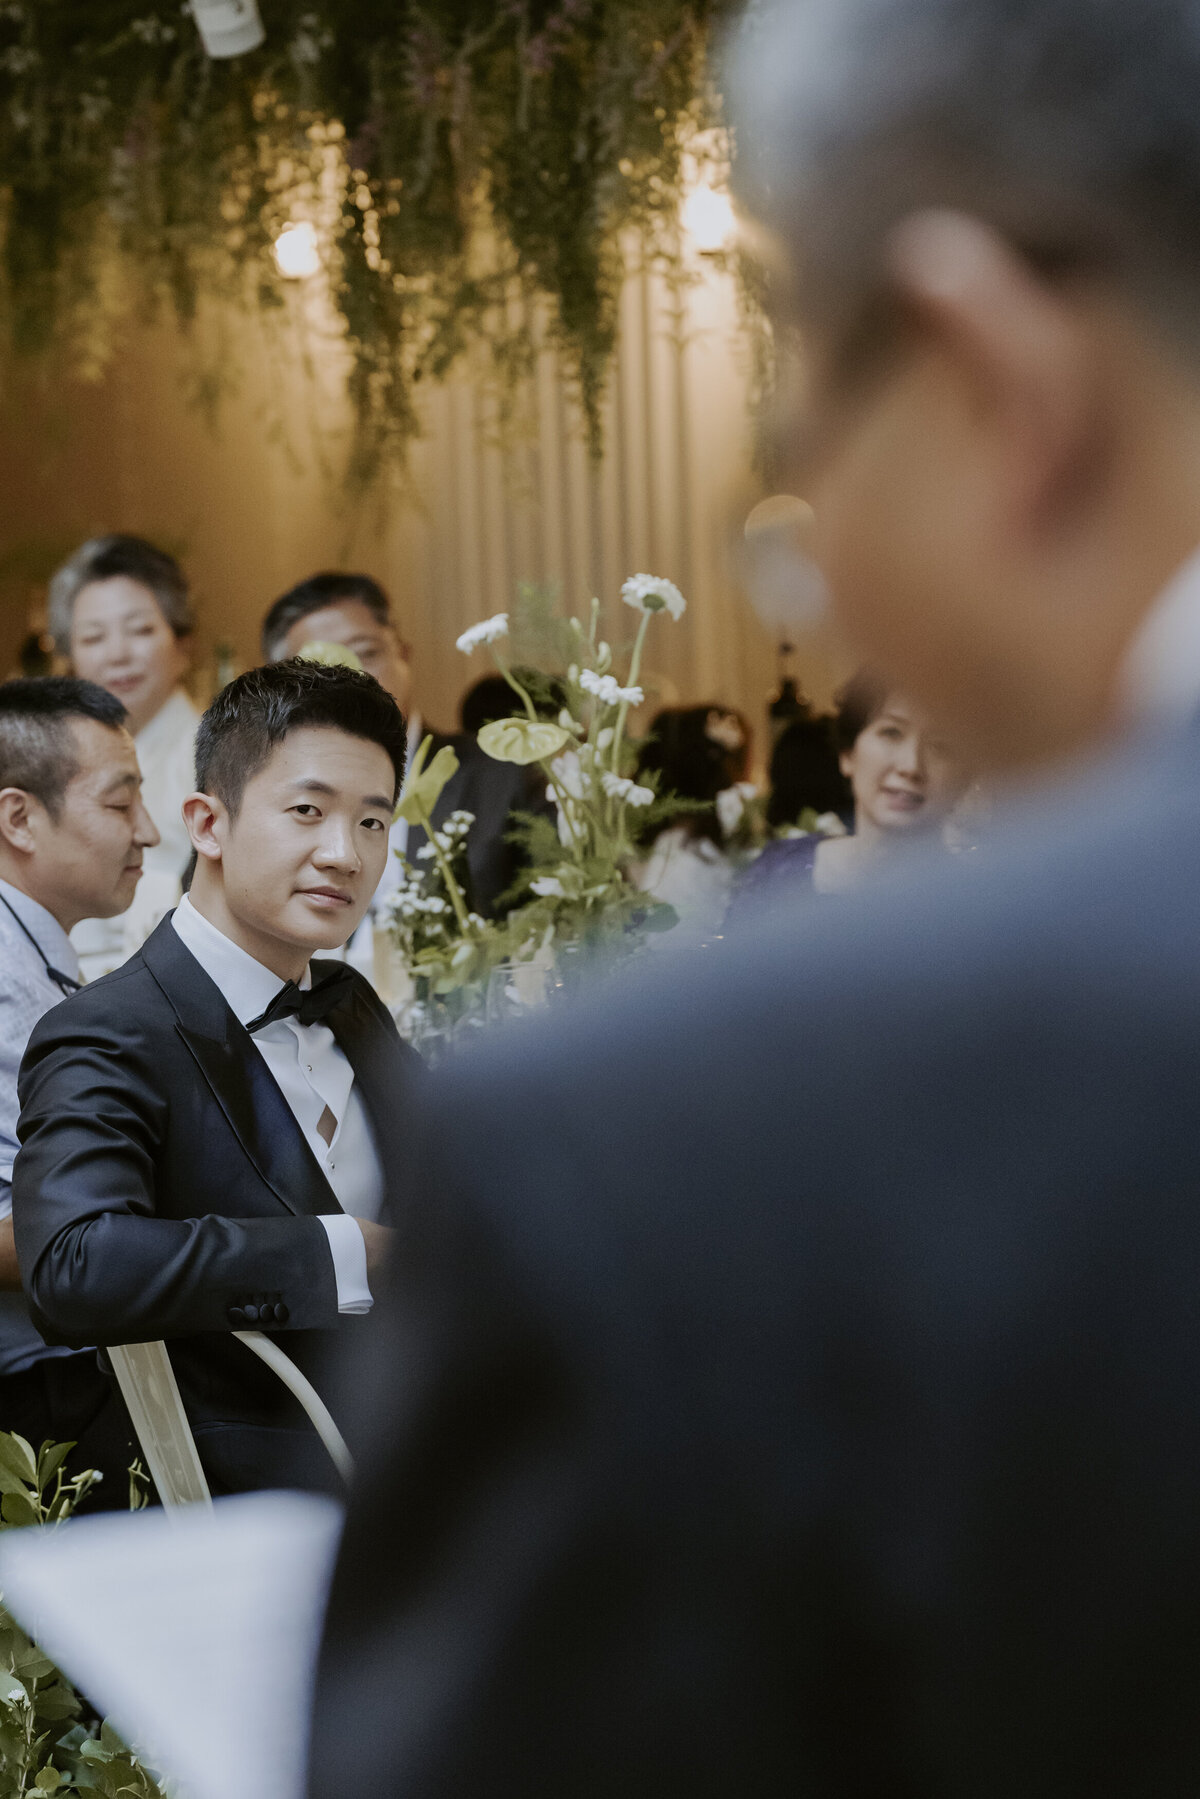 the groom staring and listening to his father's speech